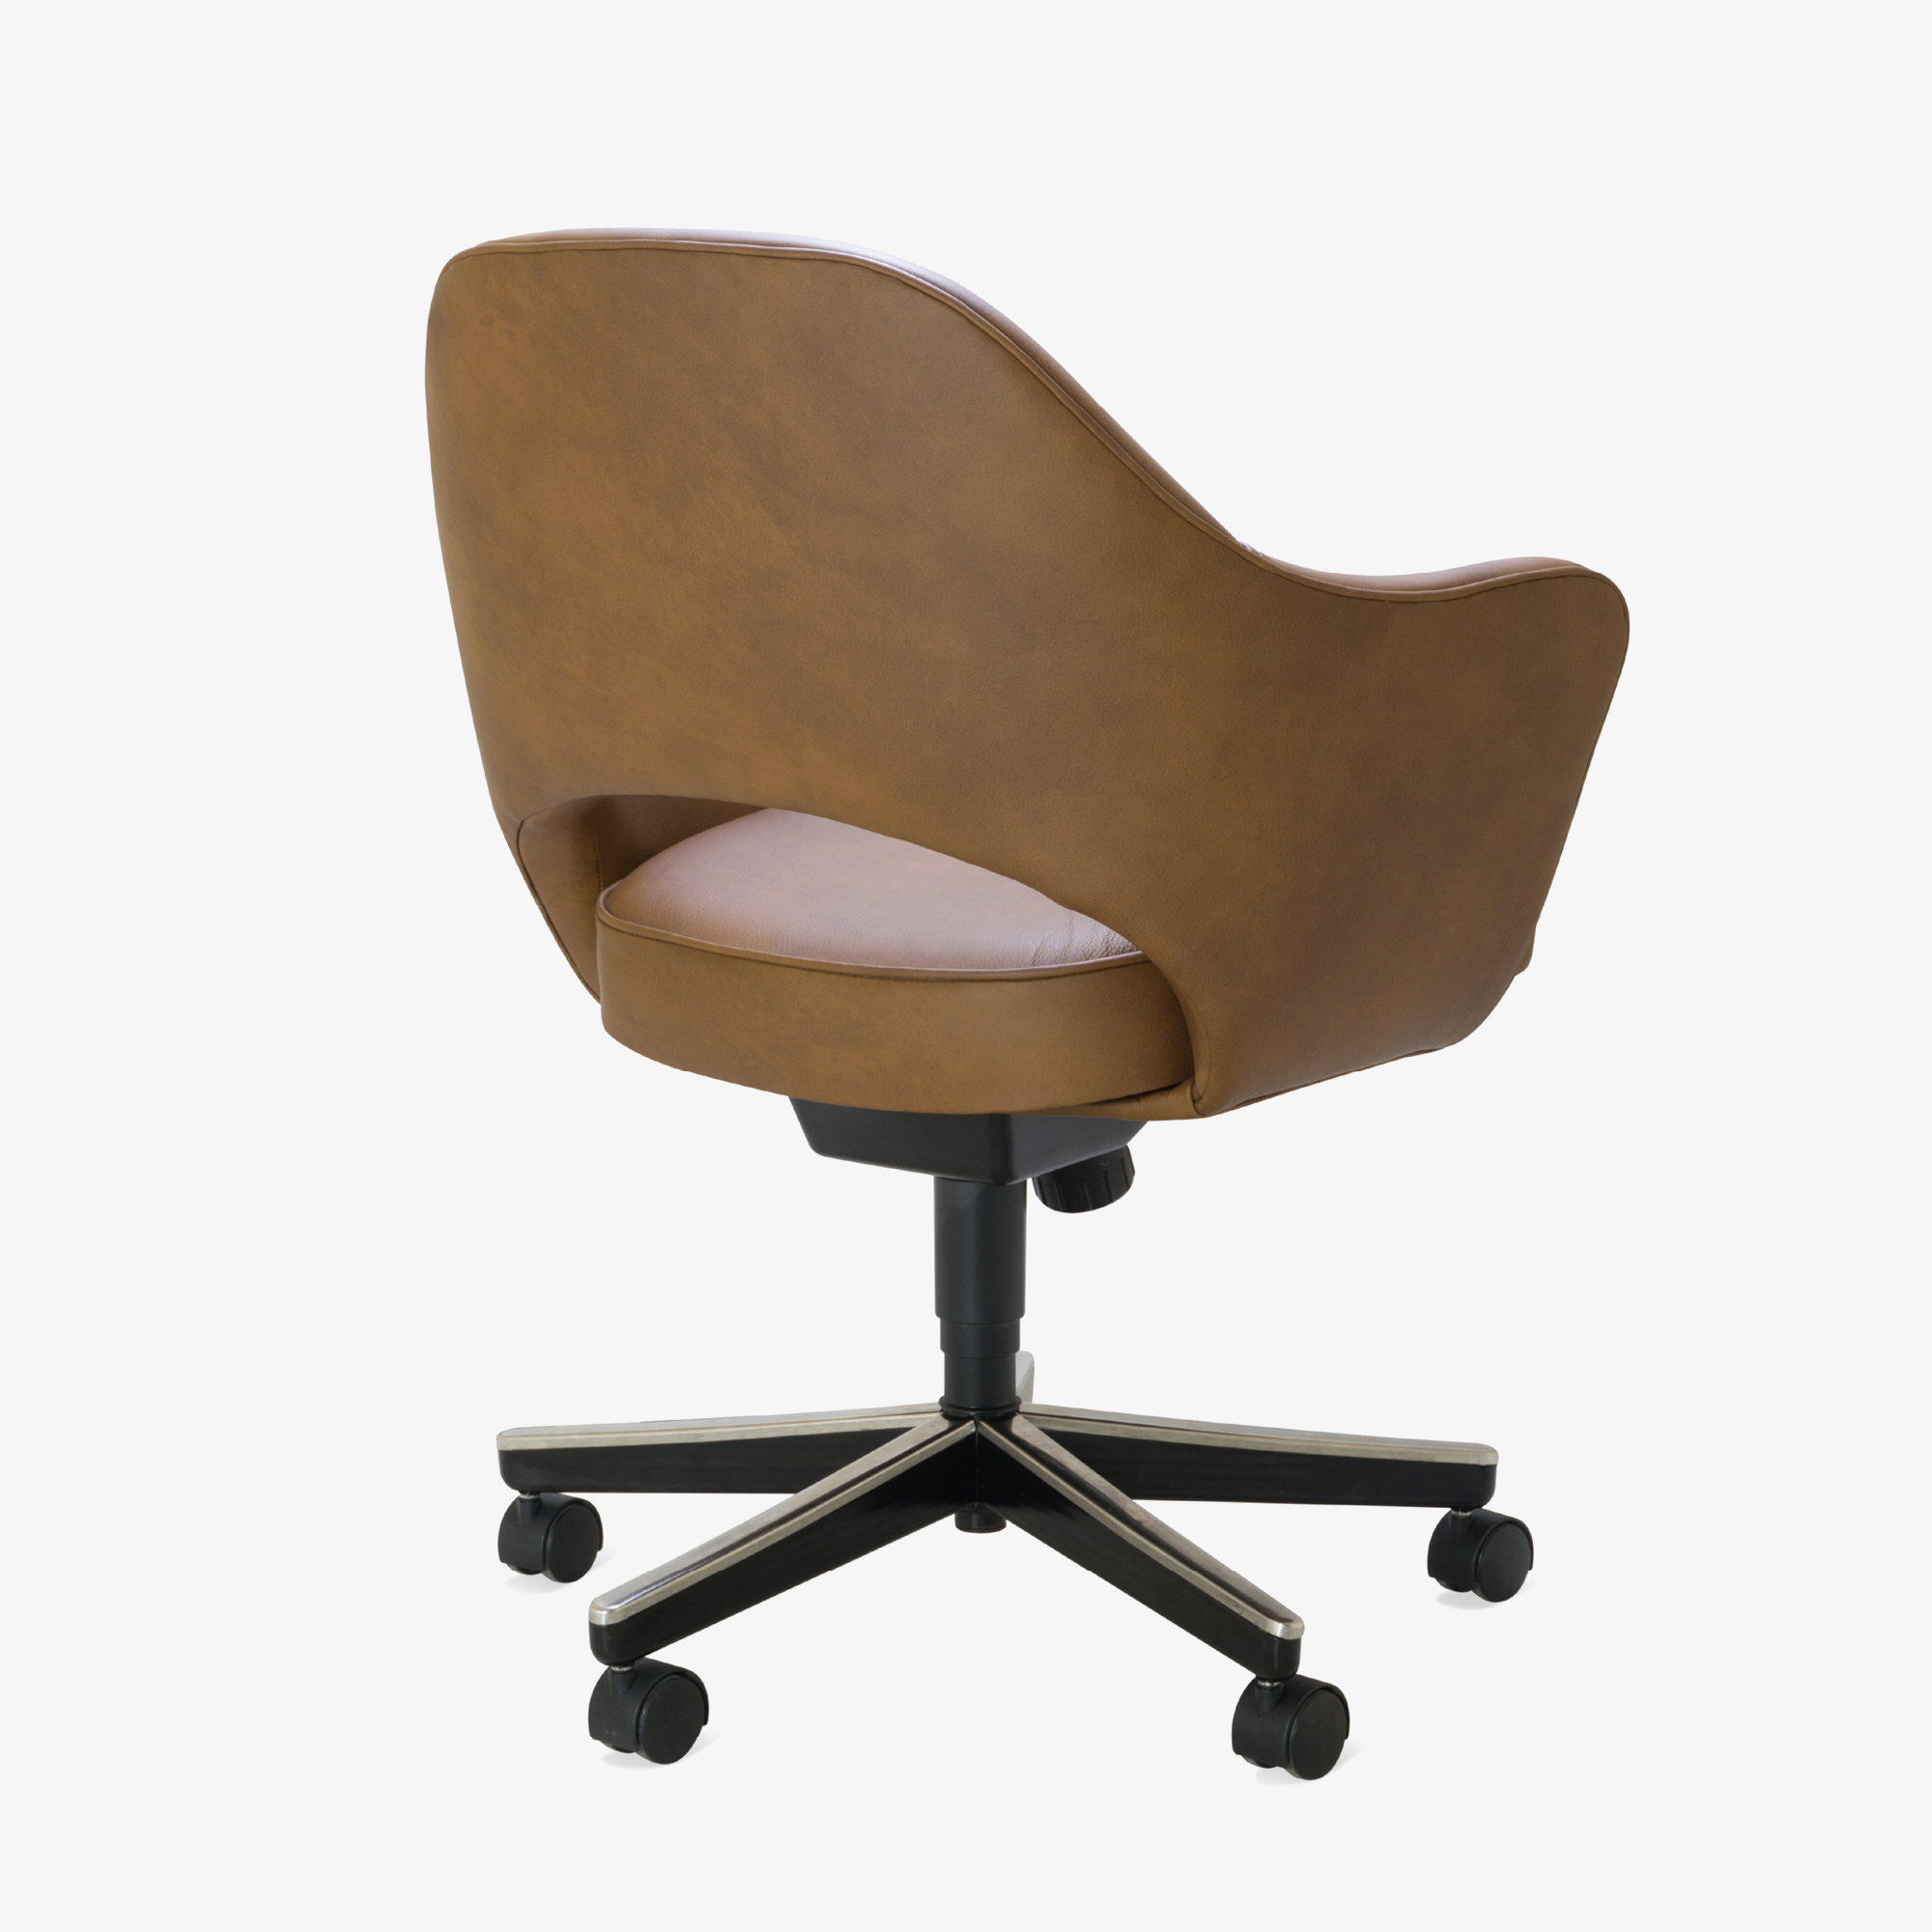 Saarinen Executive Arm Chair in Saddle Leather, Swivel Base4.png